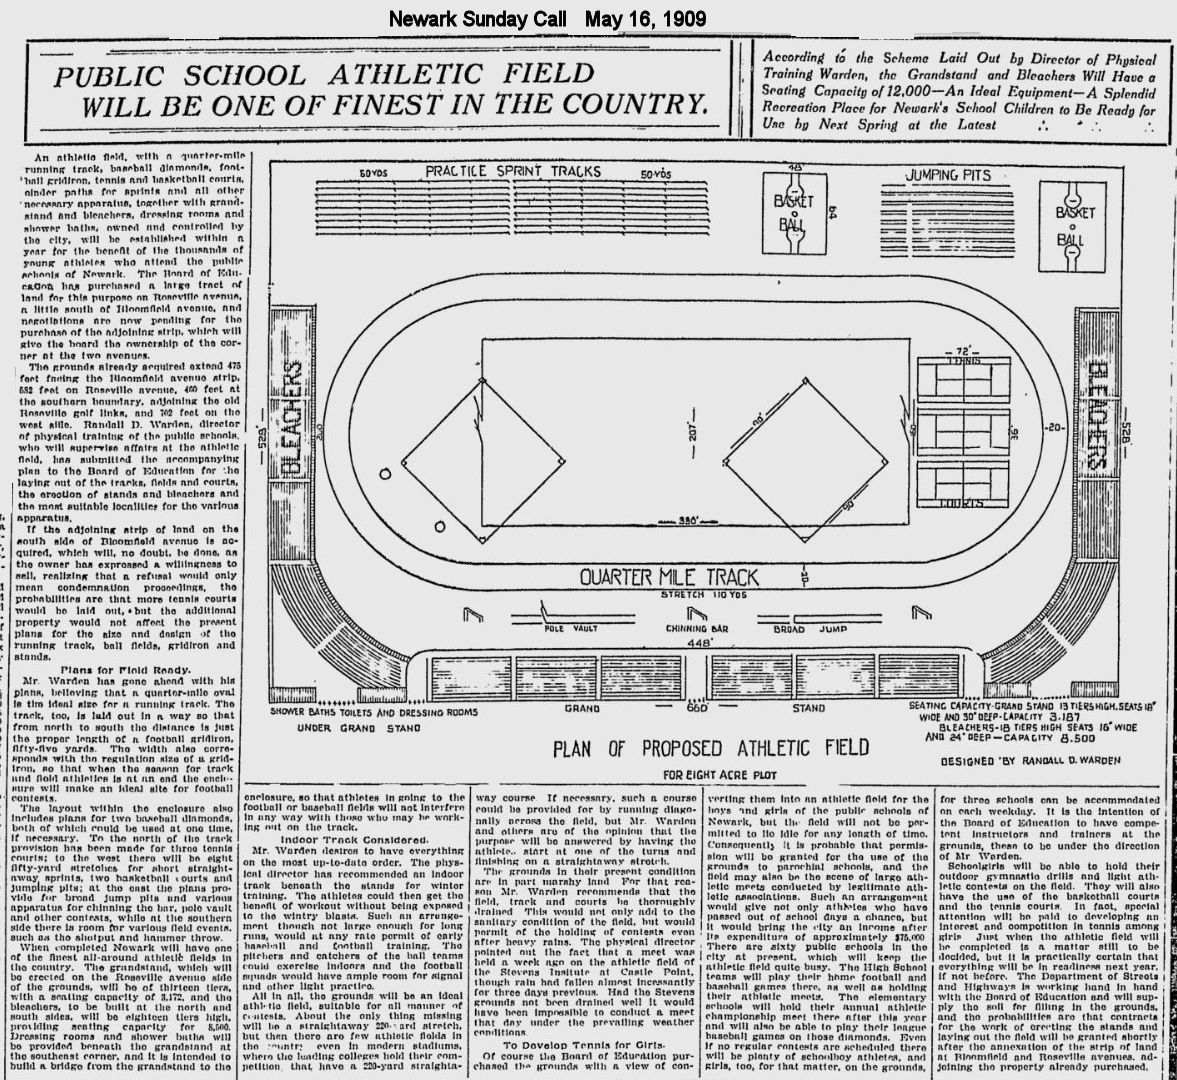 Public School Athletic Field Will be One of Finest in the Country
May 16, 1909
